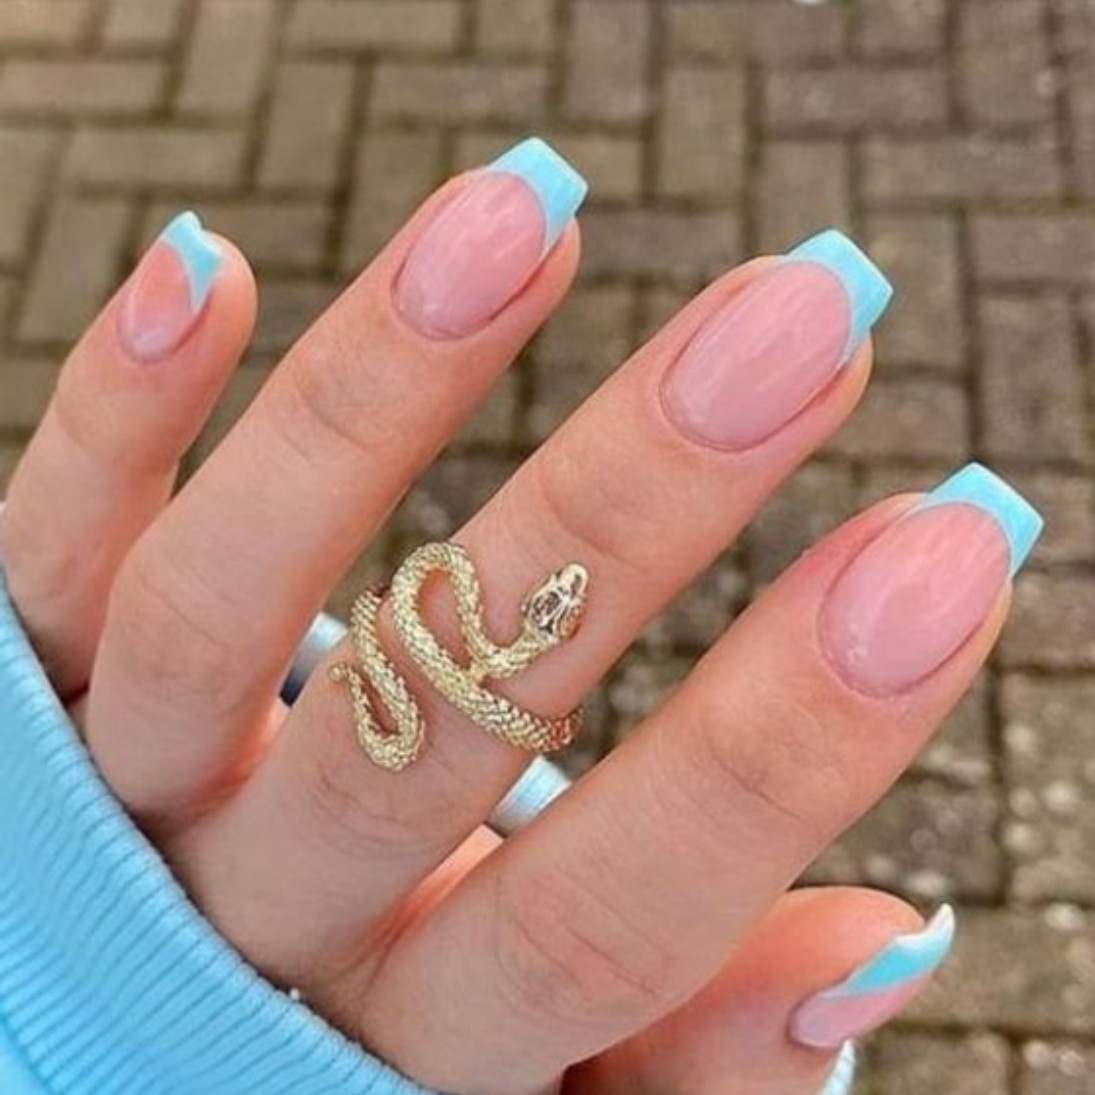 Pastel French Manicure with a soft blue tip, embodying spring vibes